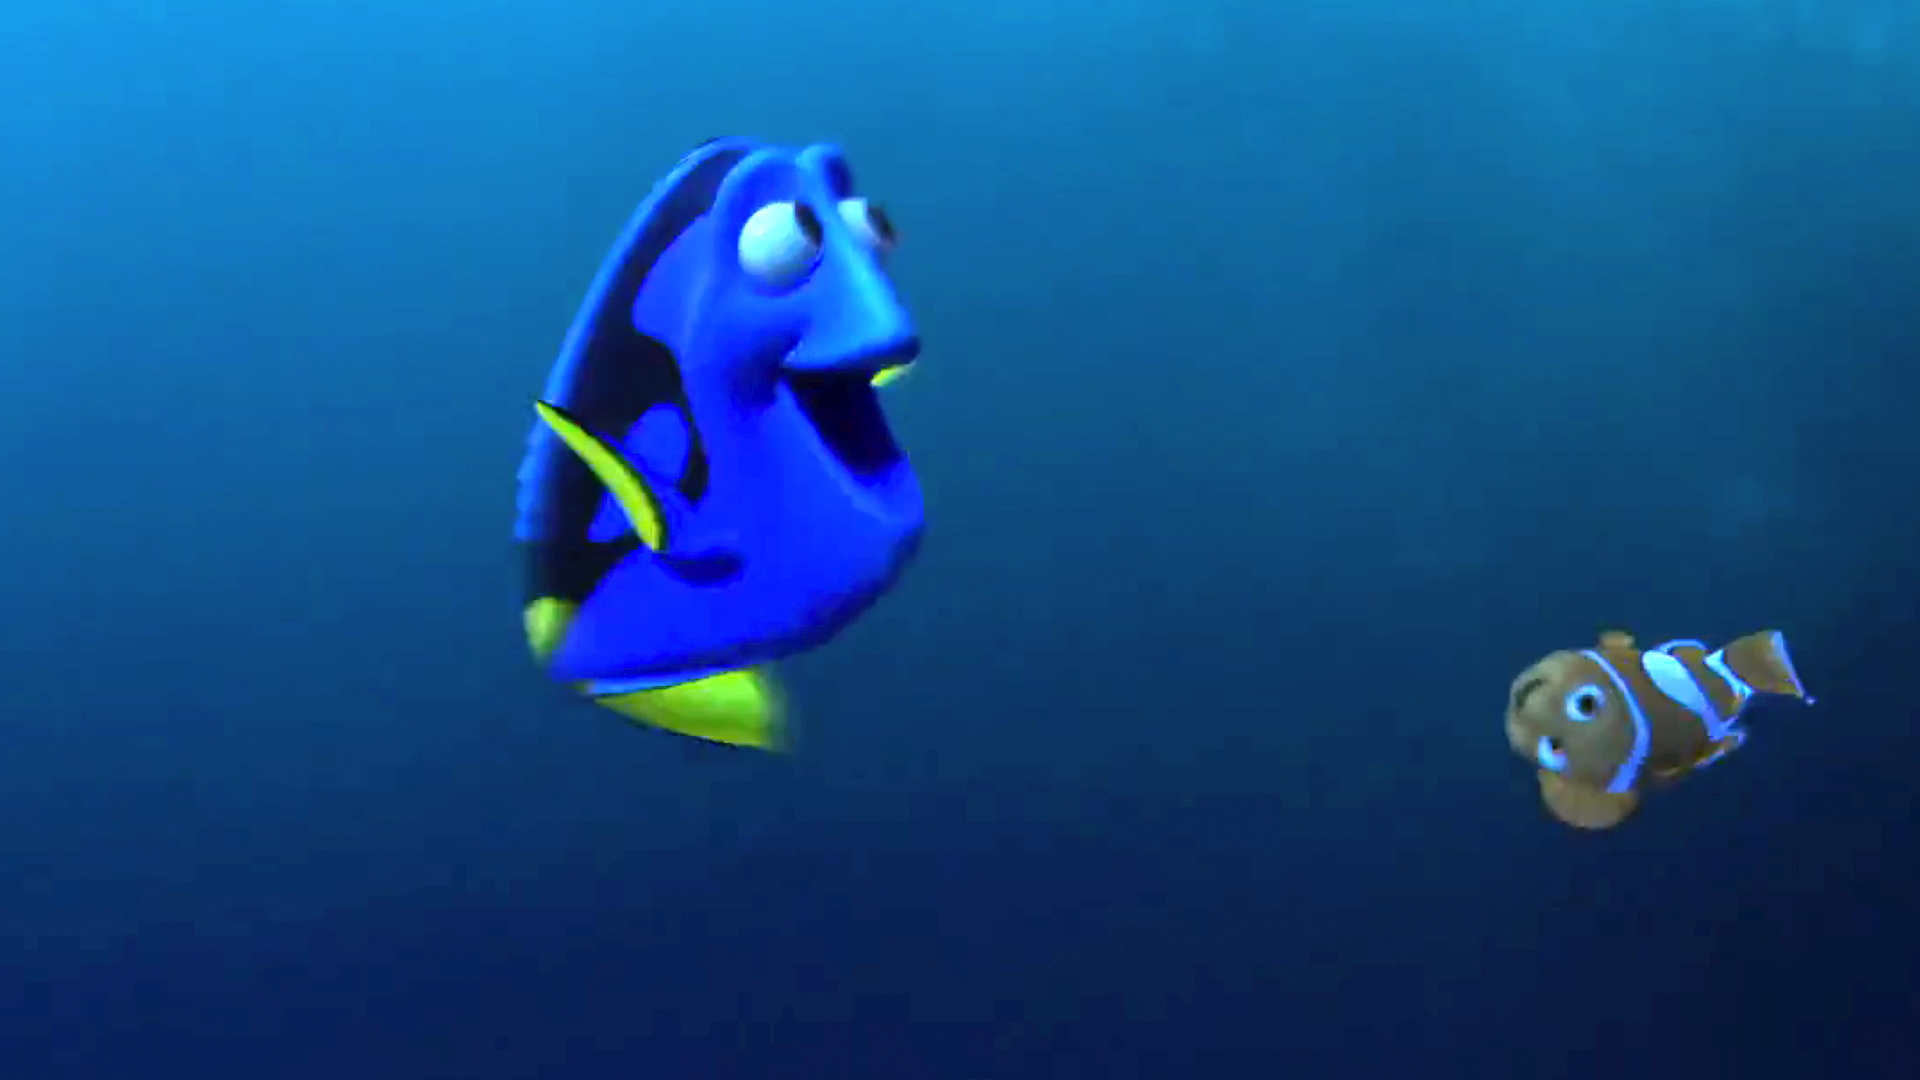 Finding Dory: Finding Dory Movie Clip - Totally Sick 